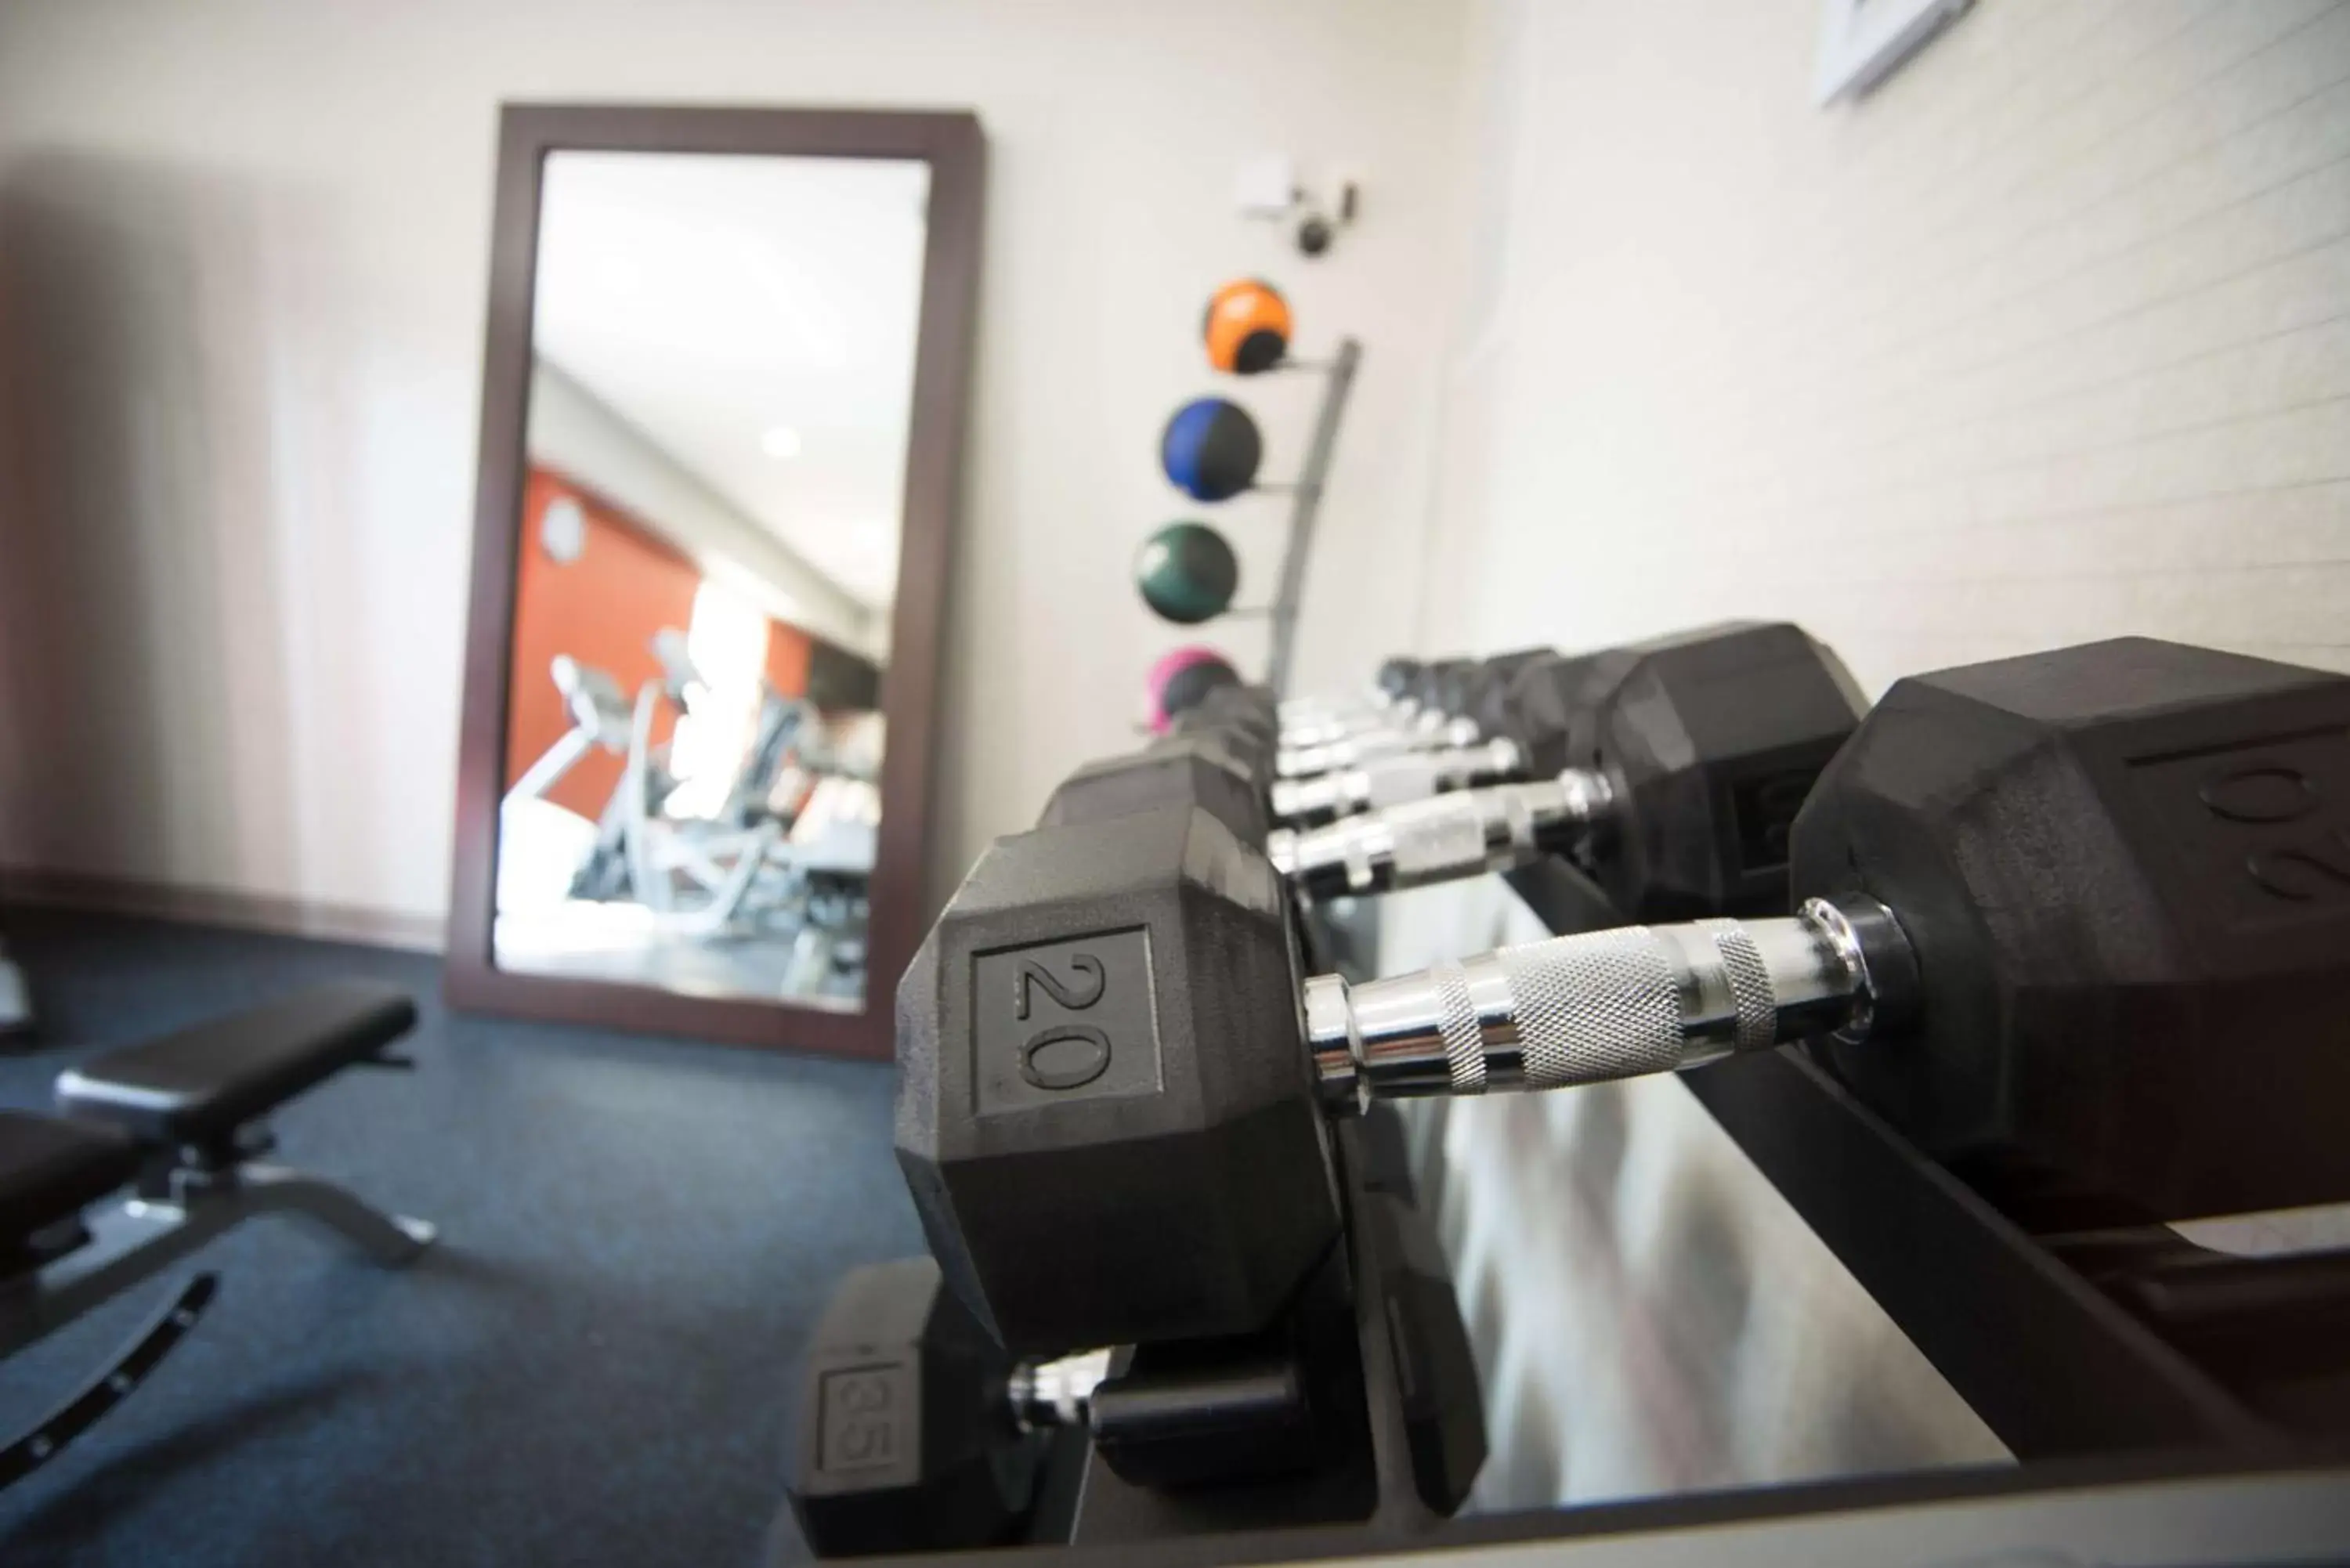 Fitness centre/facilities, Fitness Center/Facilities in Home2 Suites by Hilton Tulsa Hills